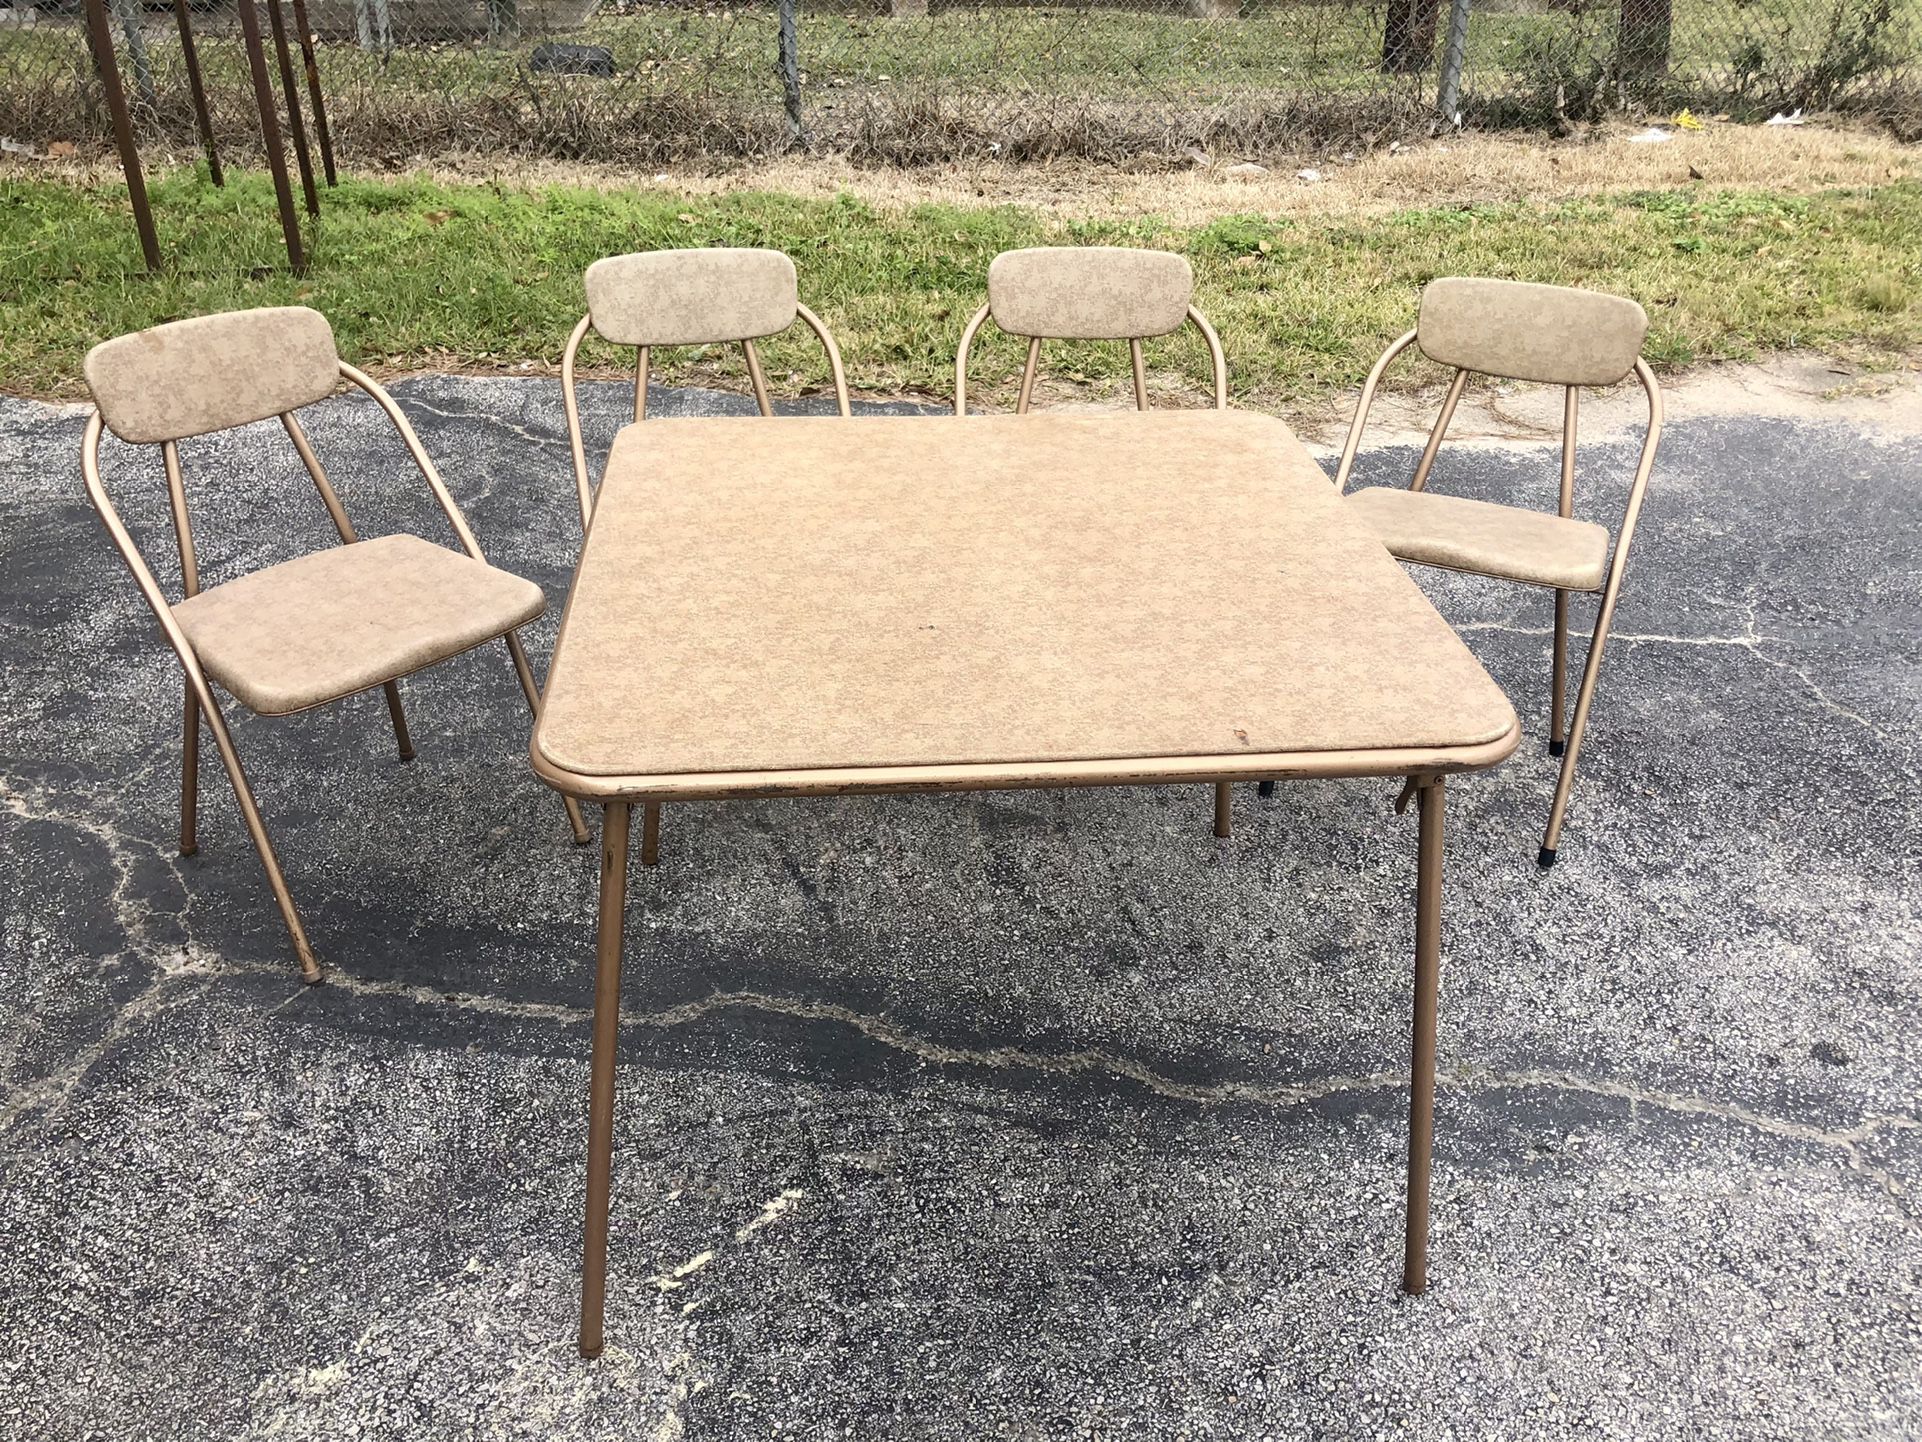 Cosco Folding Chairs And Table 